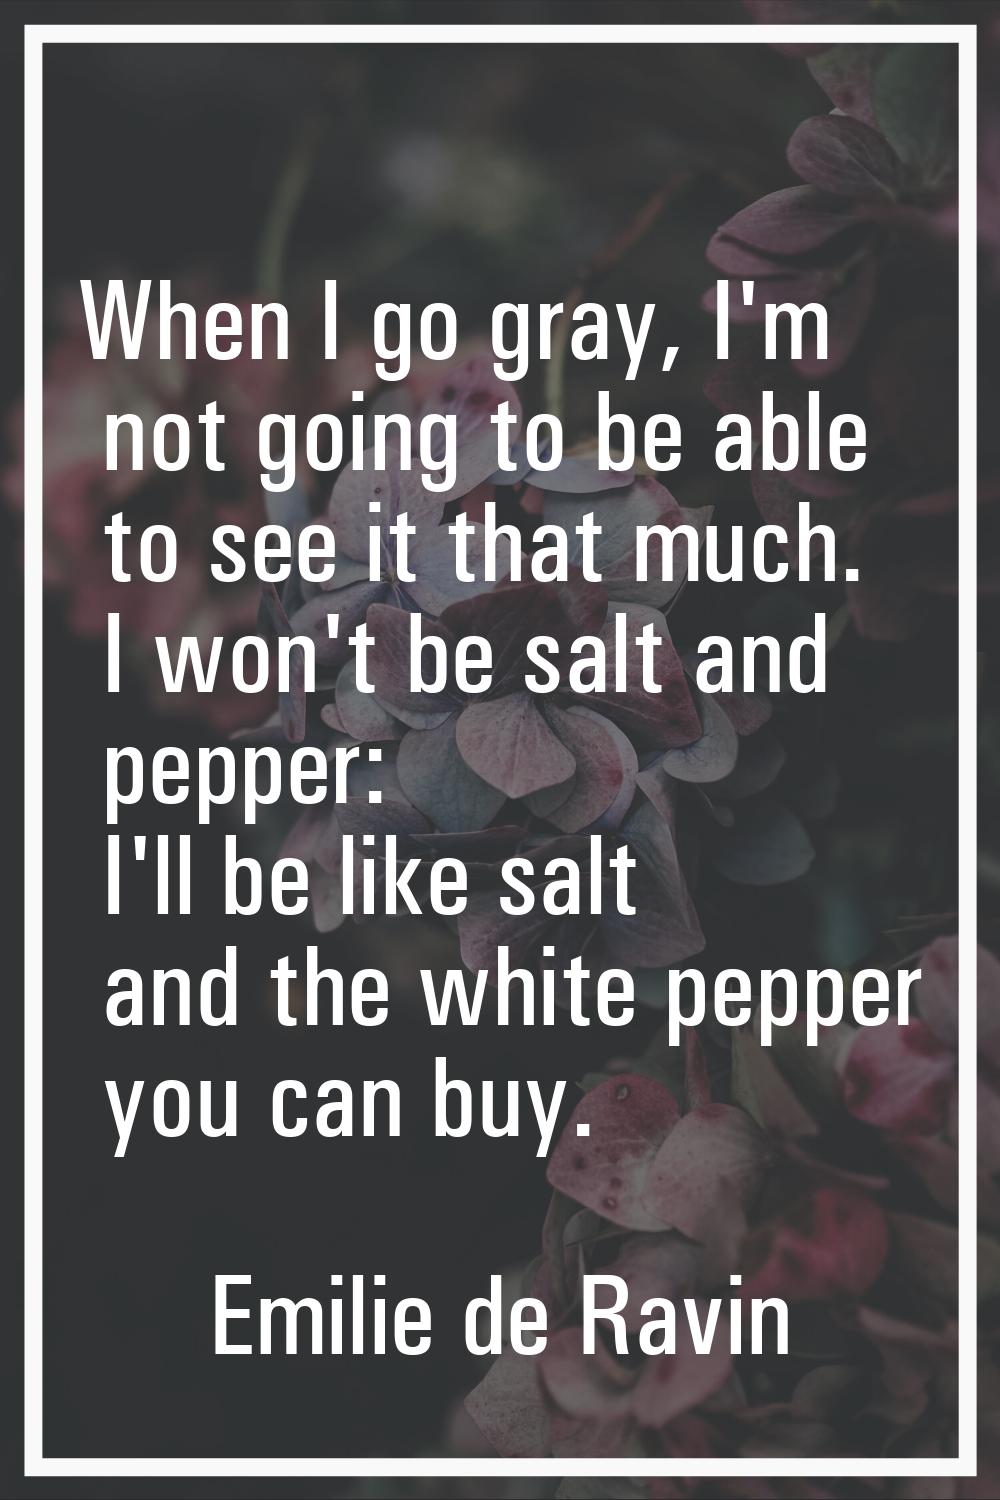 When I go gray, I'm not going to be able to see it that much. I won't be salt and pepper: I'll be l